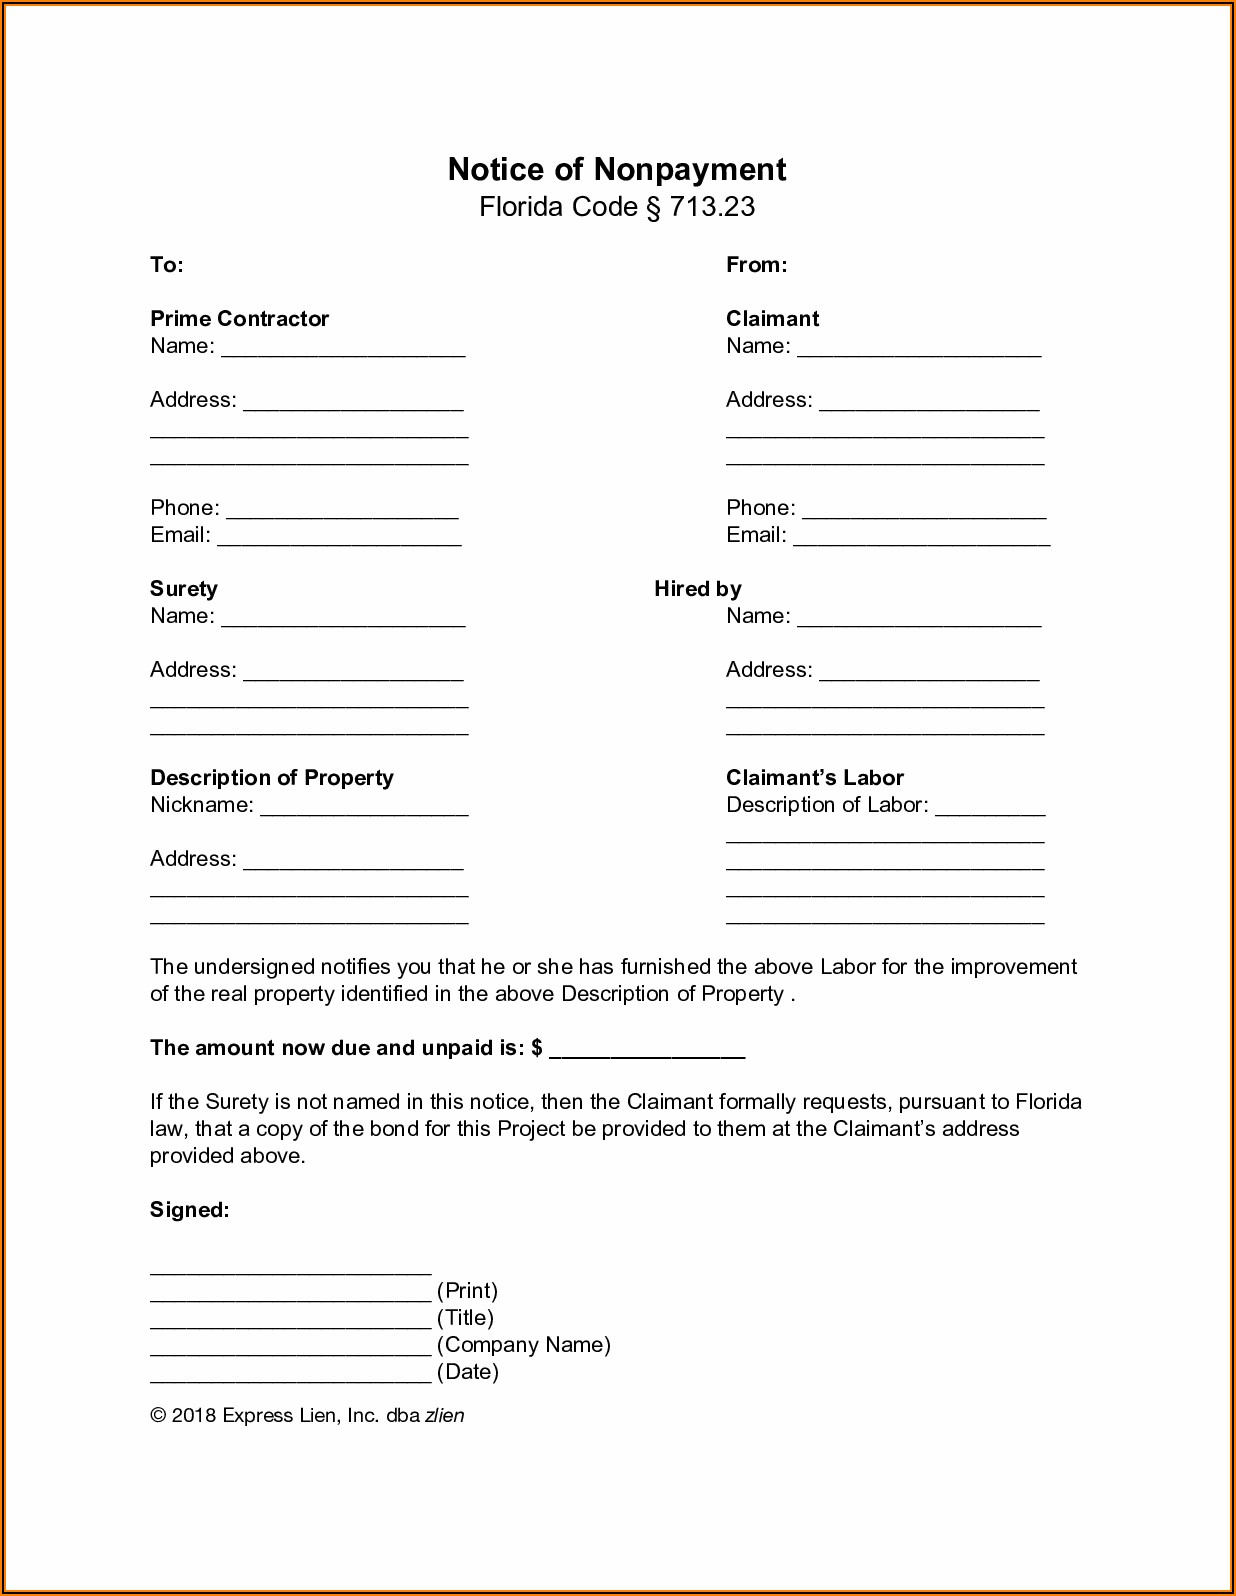 Broward County Probate Court Forms